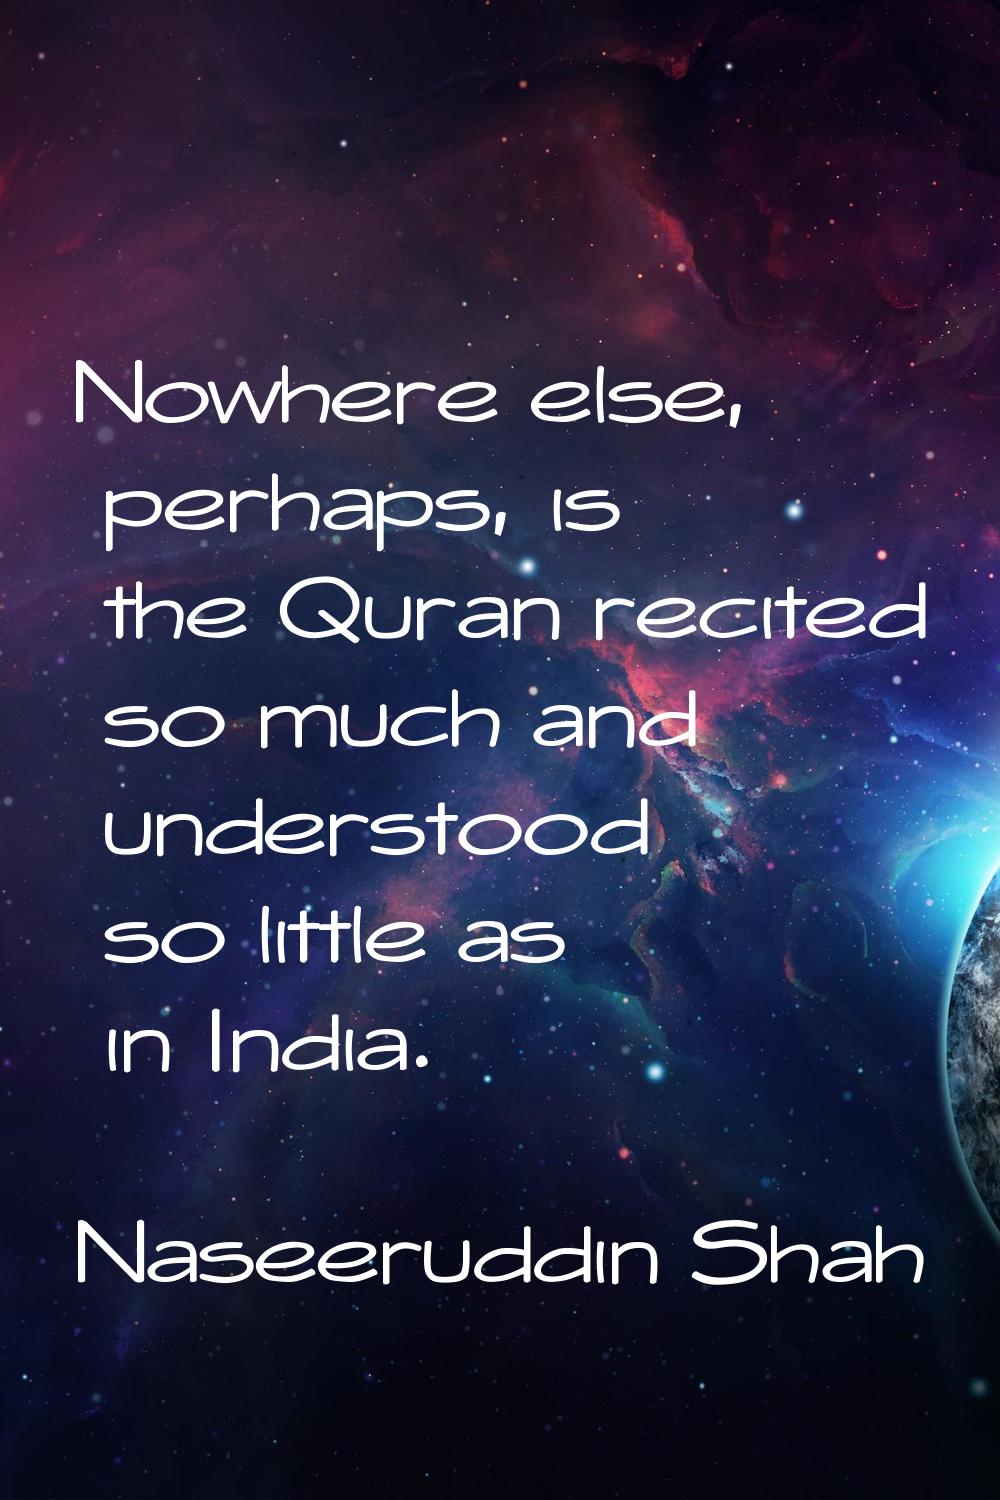 Nowhere else, perhaps, is the Quran recited so much and understood so little as in India.